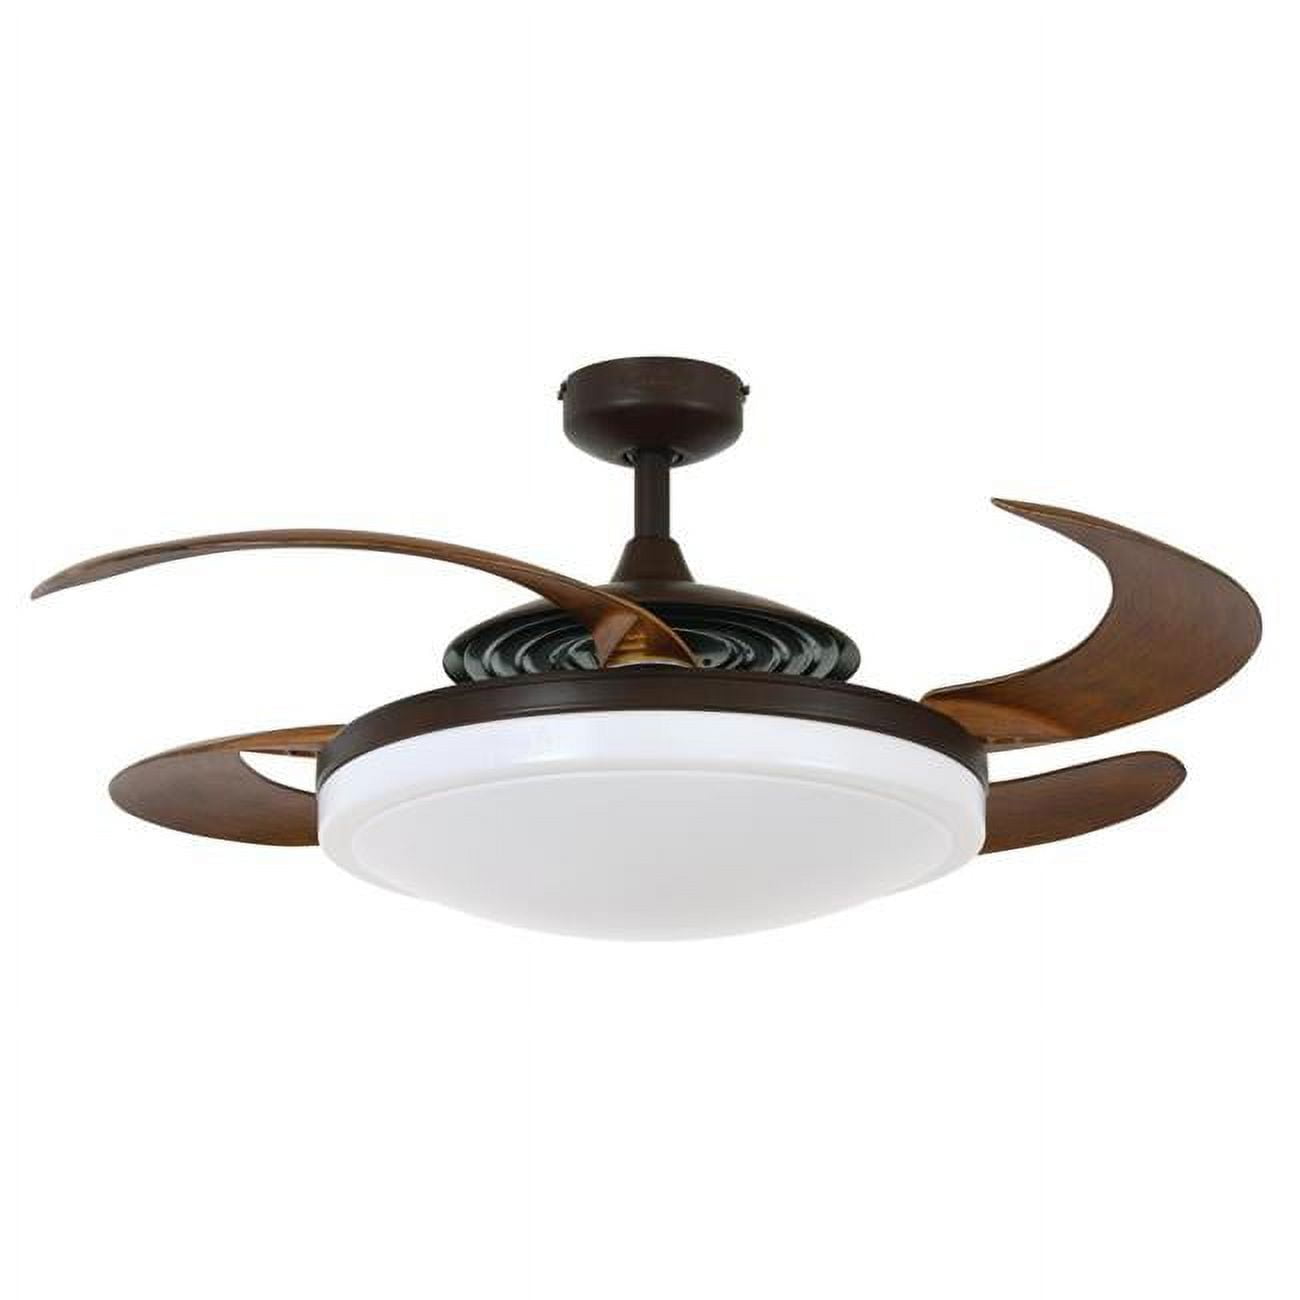 Picture of Fanaway 21093301 EVO 2 Oil Rubbed Bronze Lighting with Remote Ceiling Fan